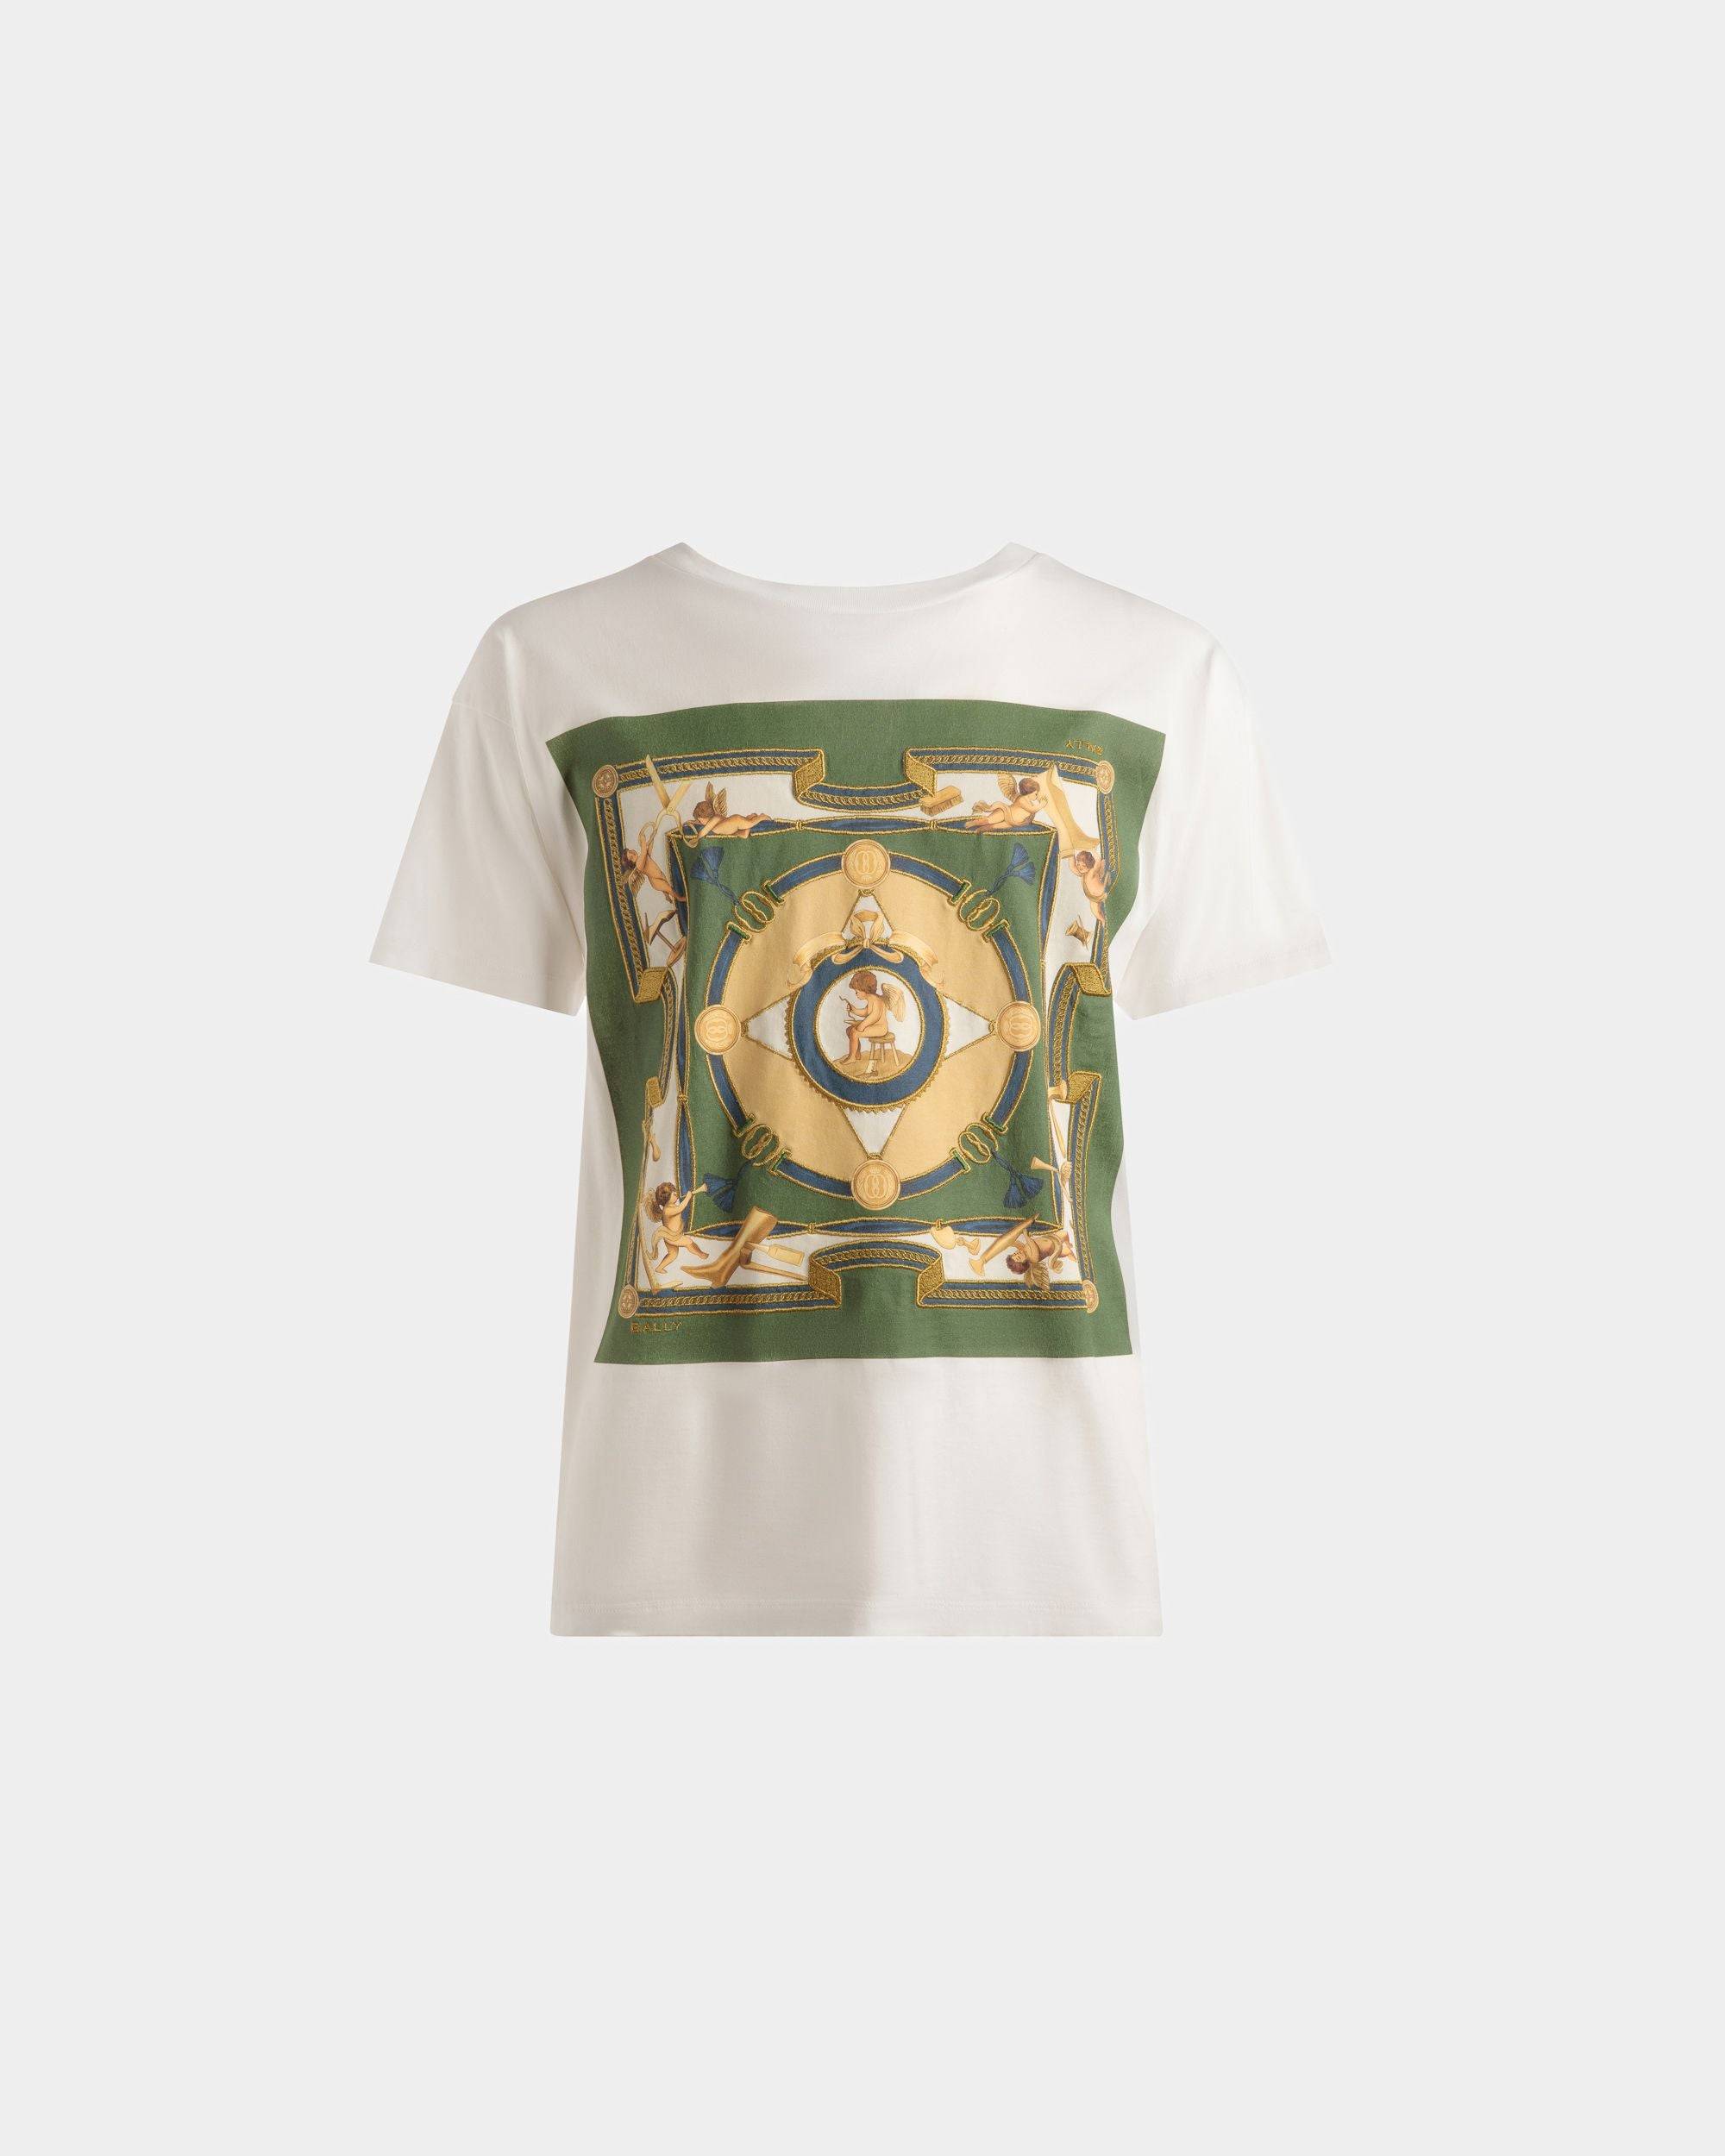 Men's Printed T-Shirt In White Cotton | Bally | Still Life Front